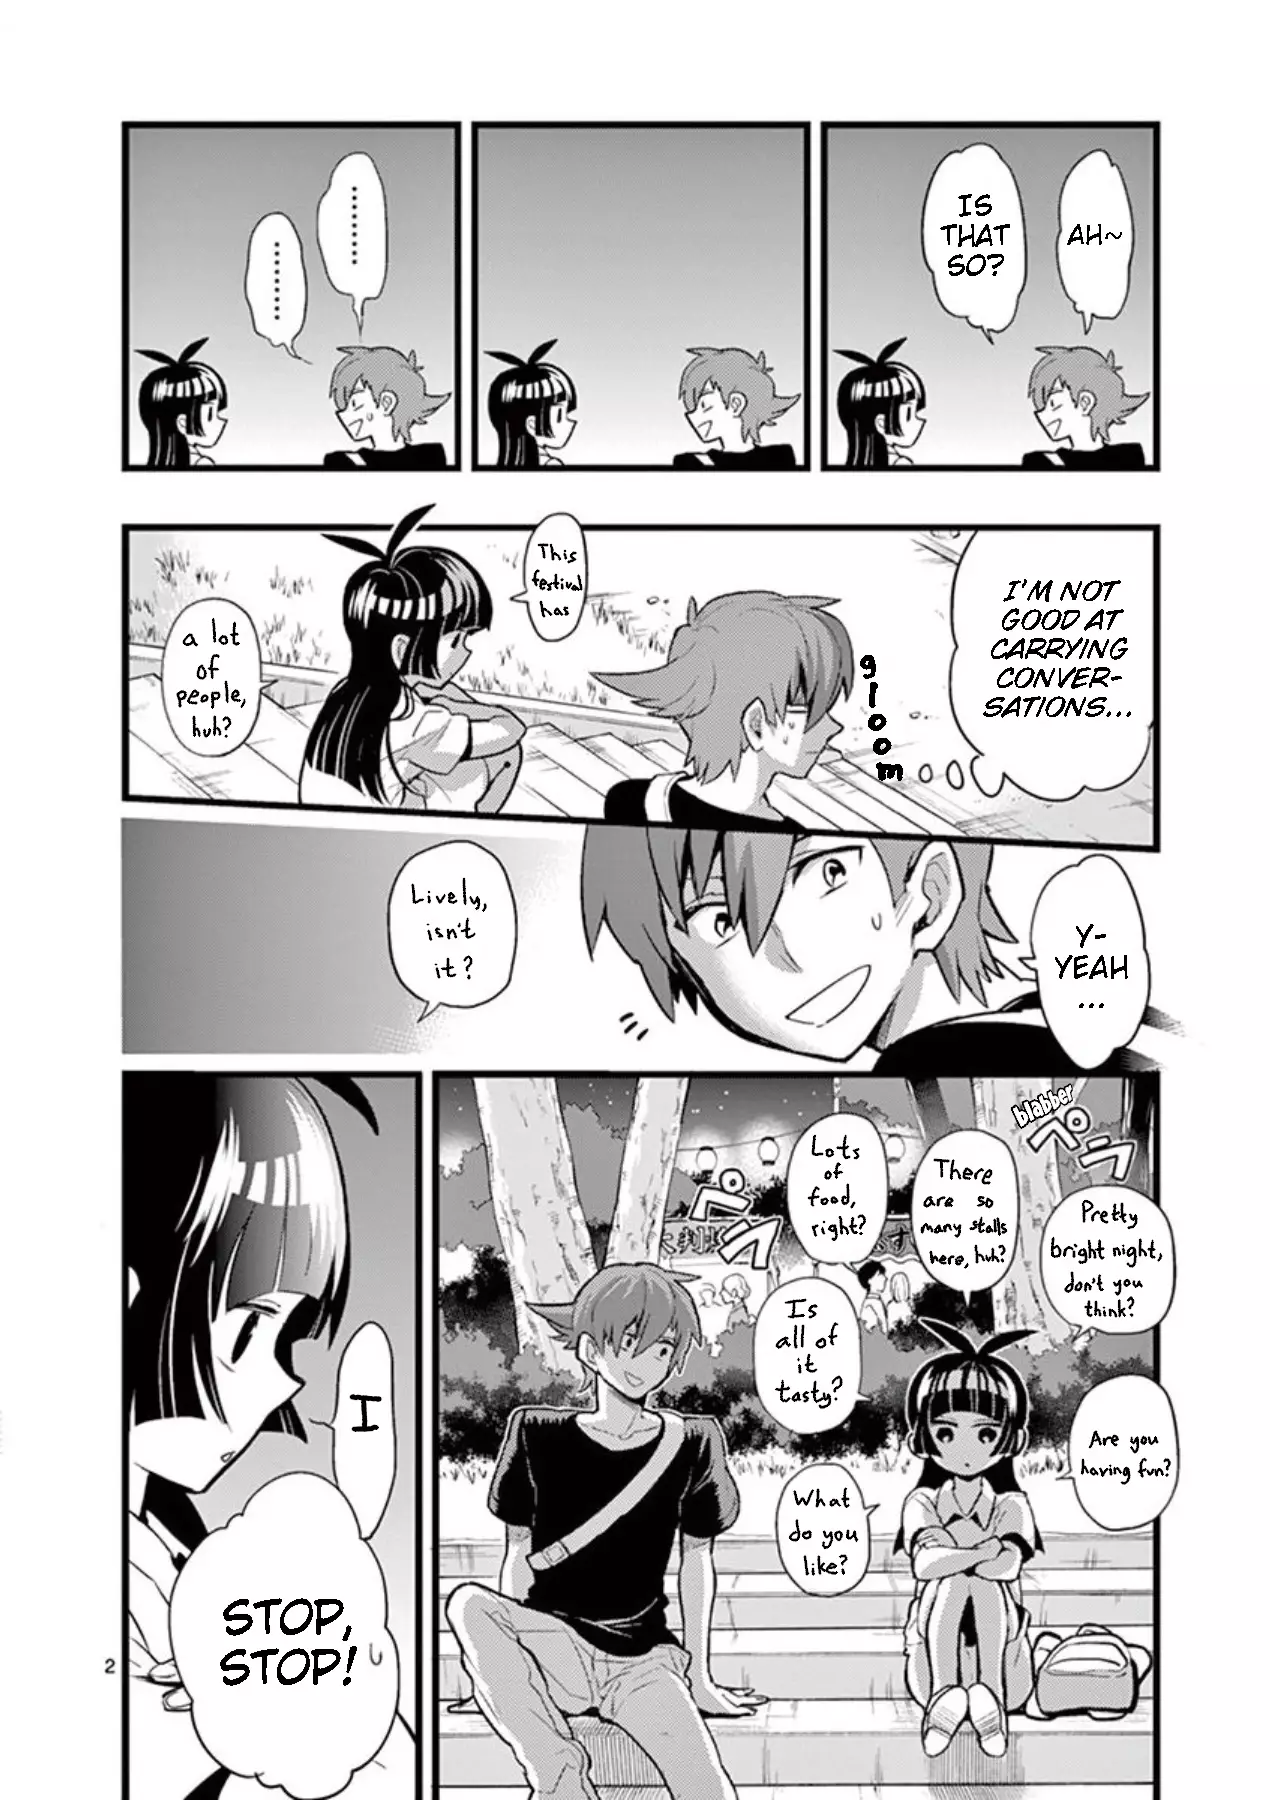 Moukin-Chan - 45 page 2-16681ca8